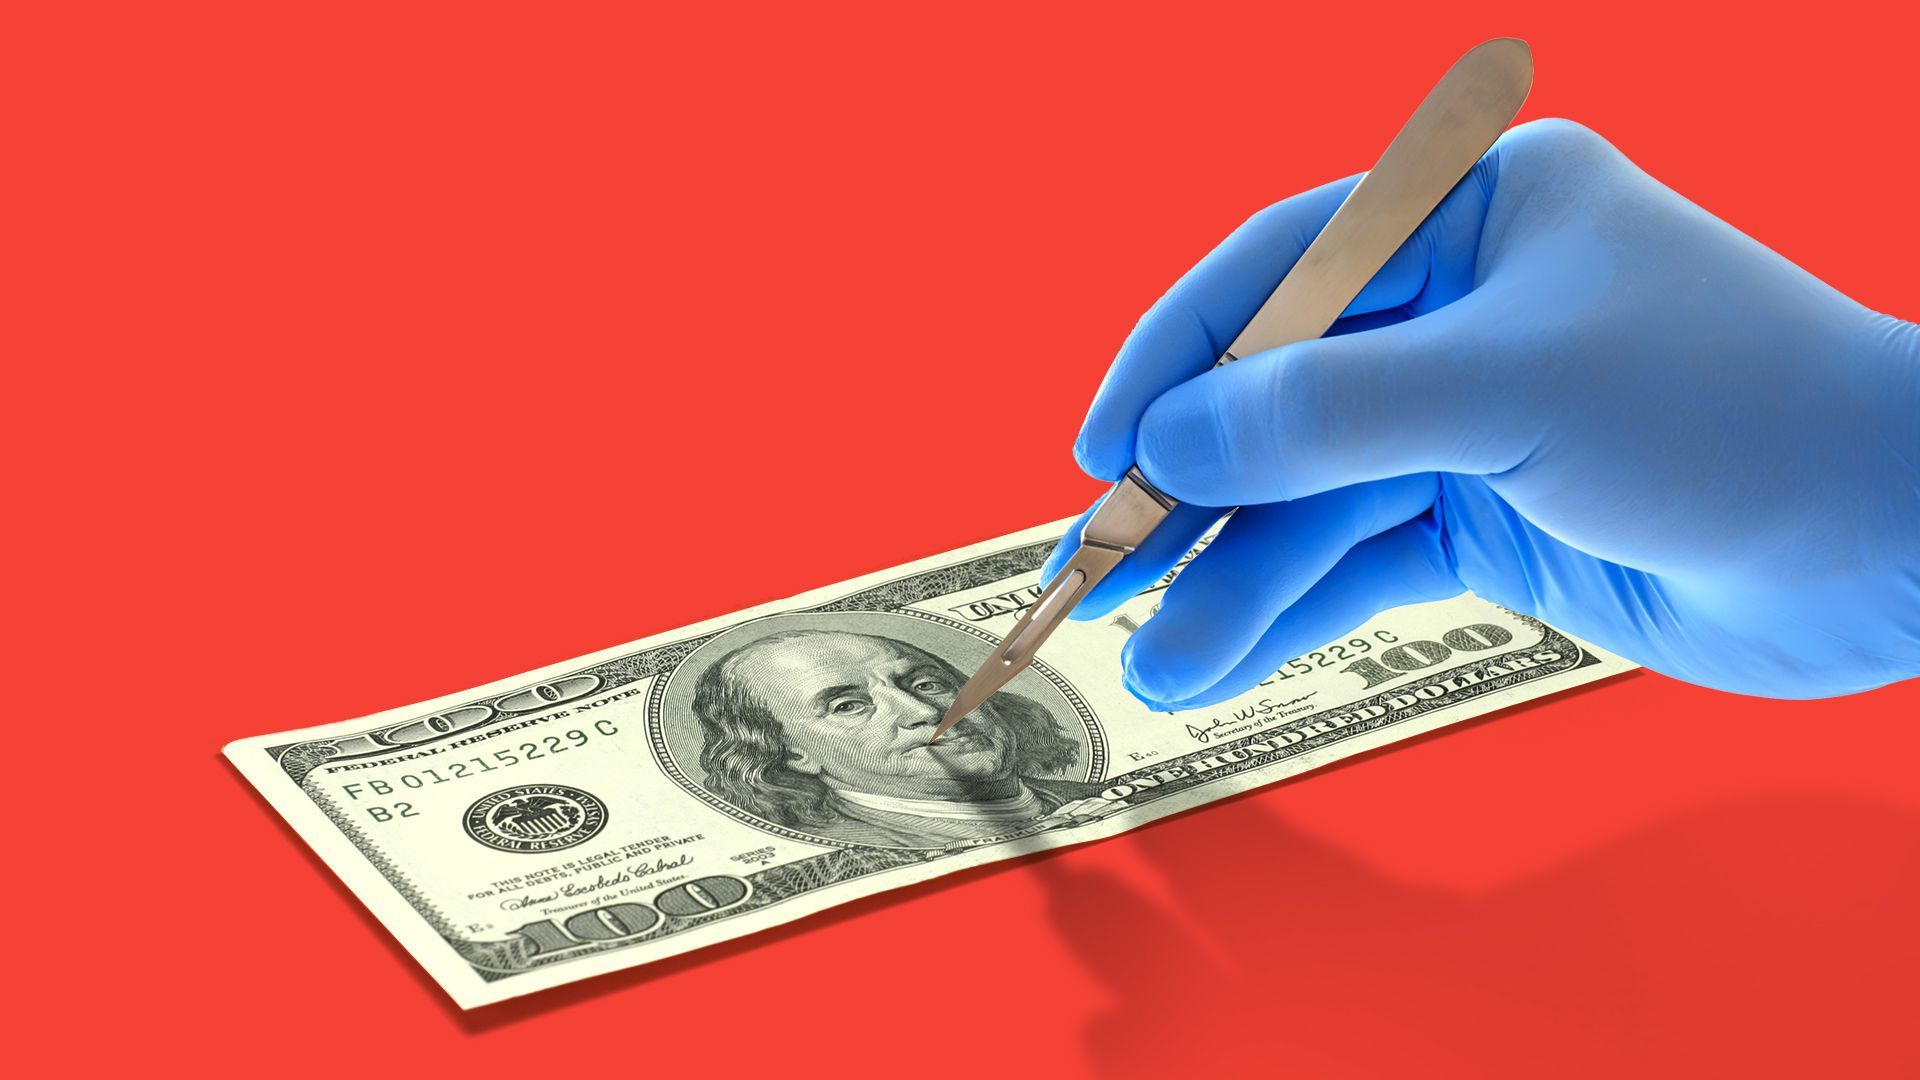 Illustration of a gloved hand holding a scalpel over a hundred dollar bill